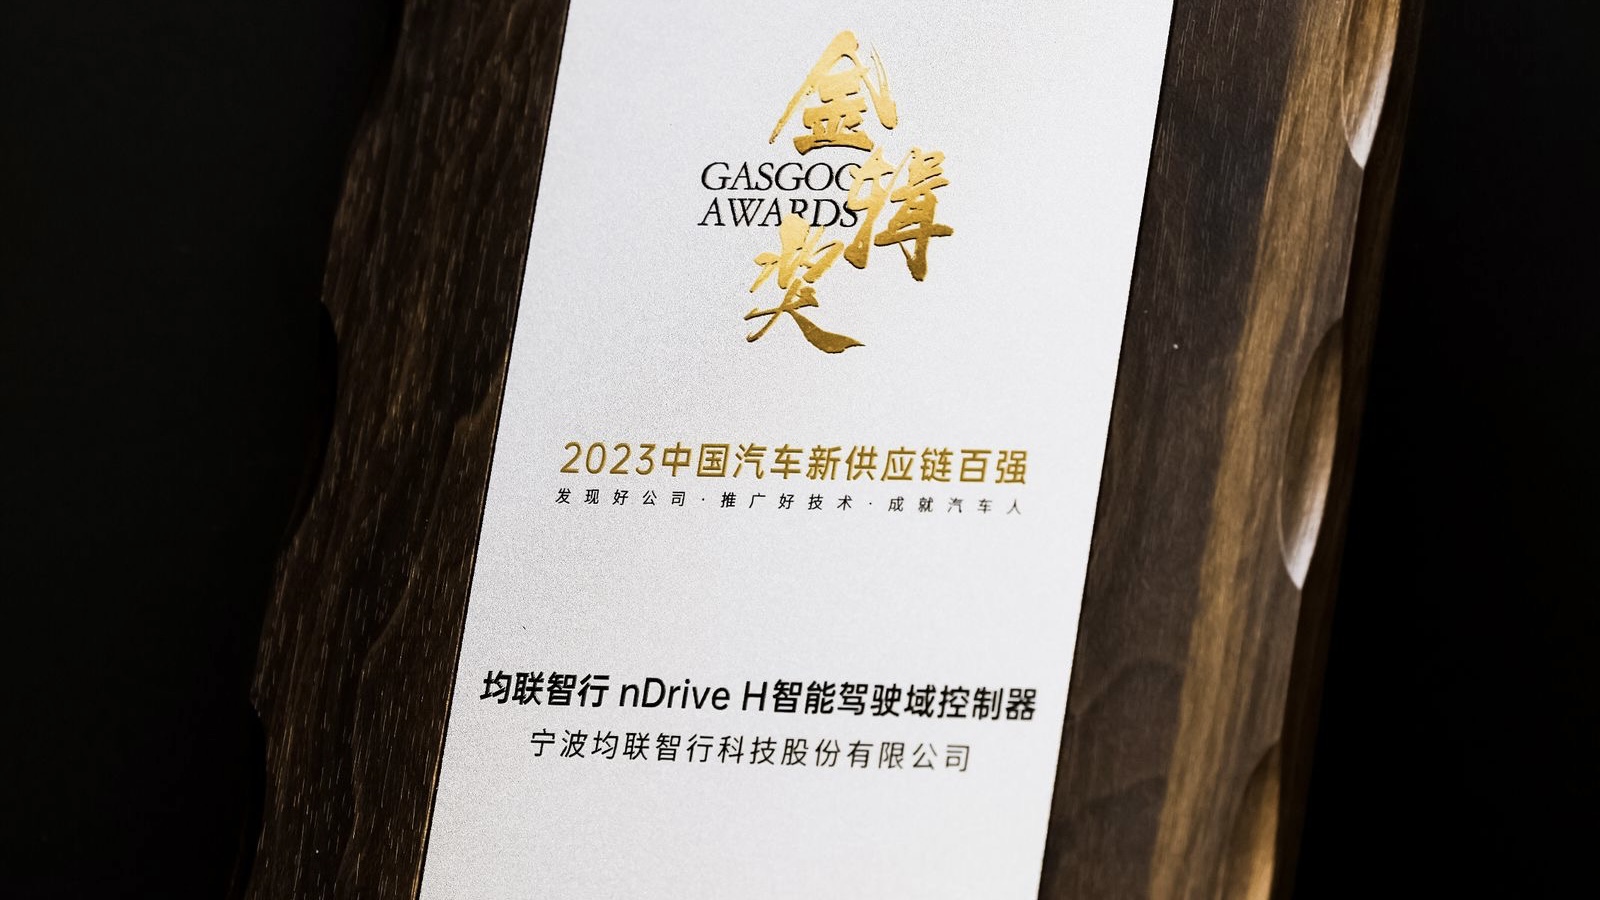 JOYNEXT won the title of “Top 100 Players of China's New Automotive Supply Chain” at the Gasgoo Awards 2023